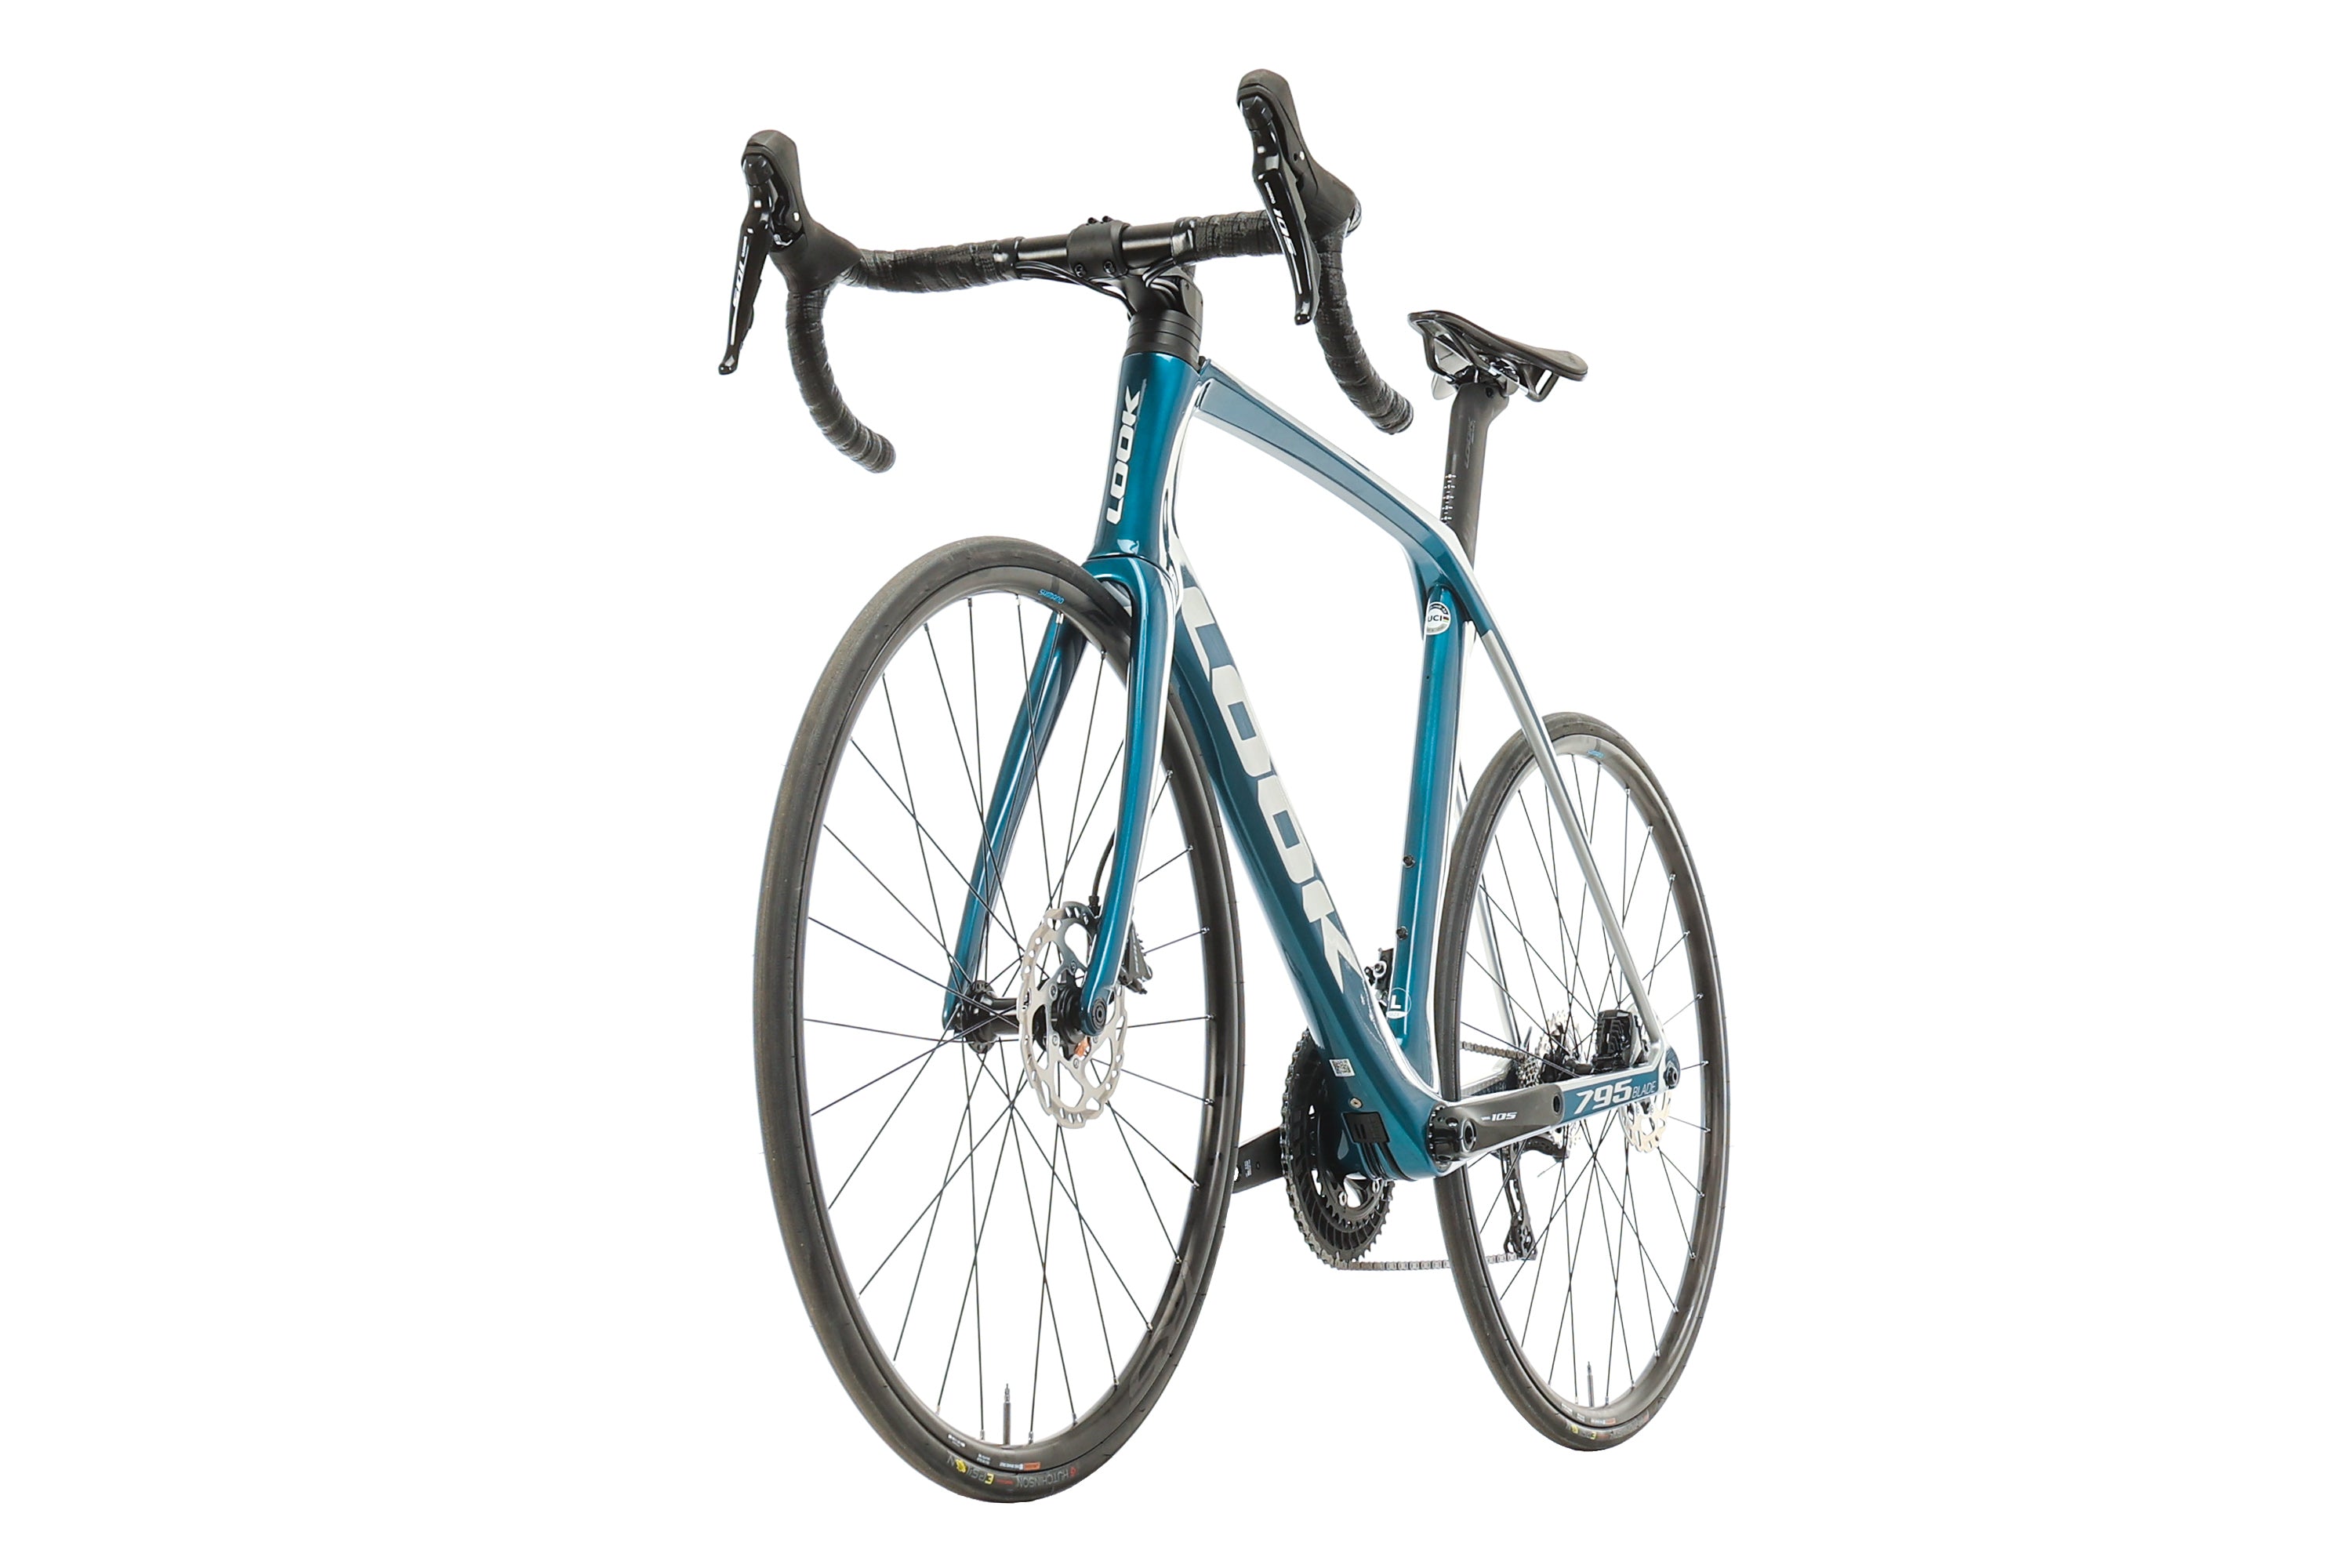 LOOK 795 Blade Disc 105 Road Bike - 2022, Large | The Pro's Closet 